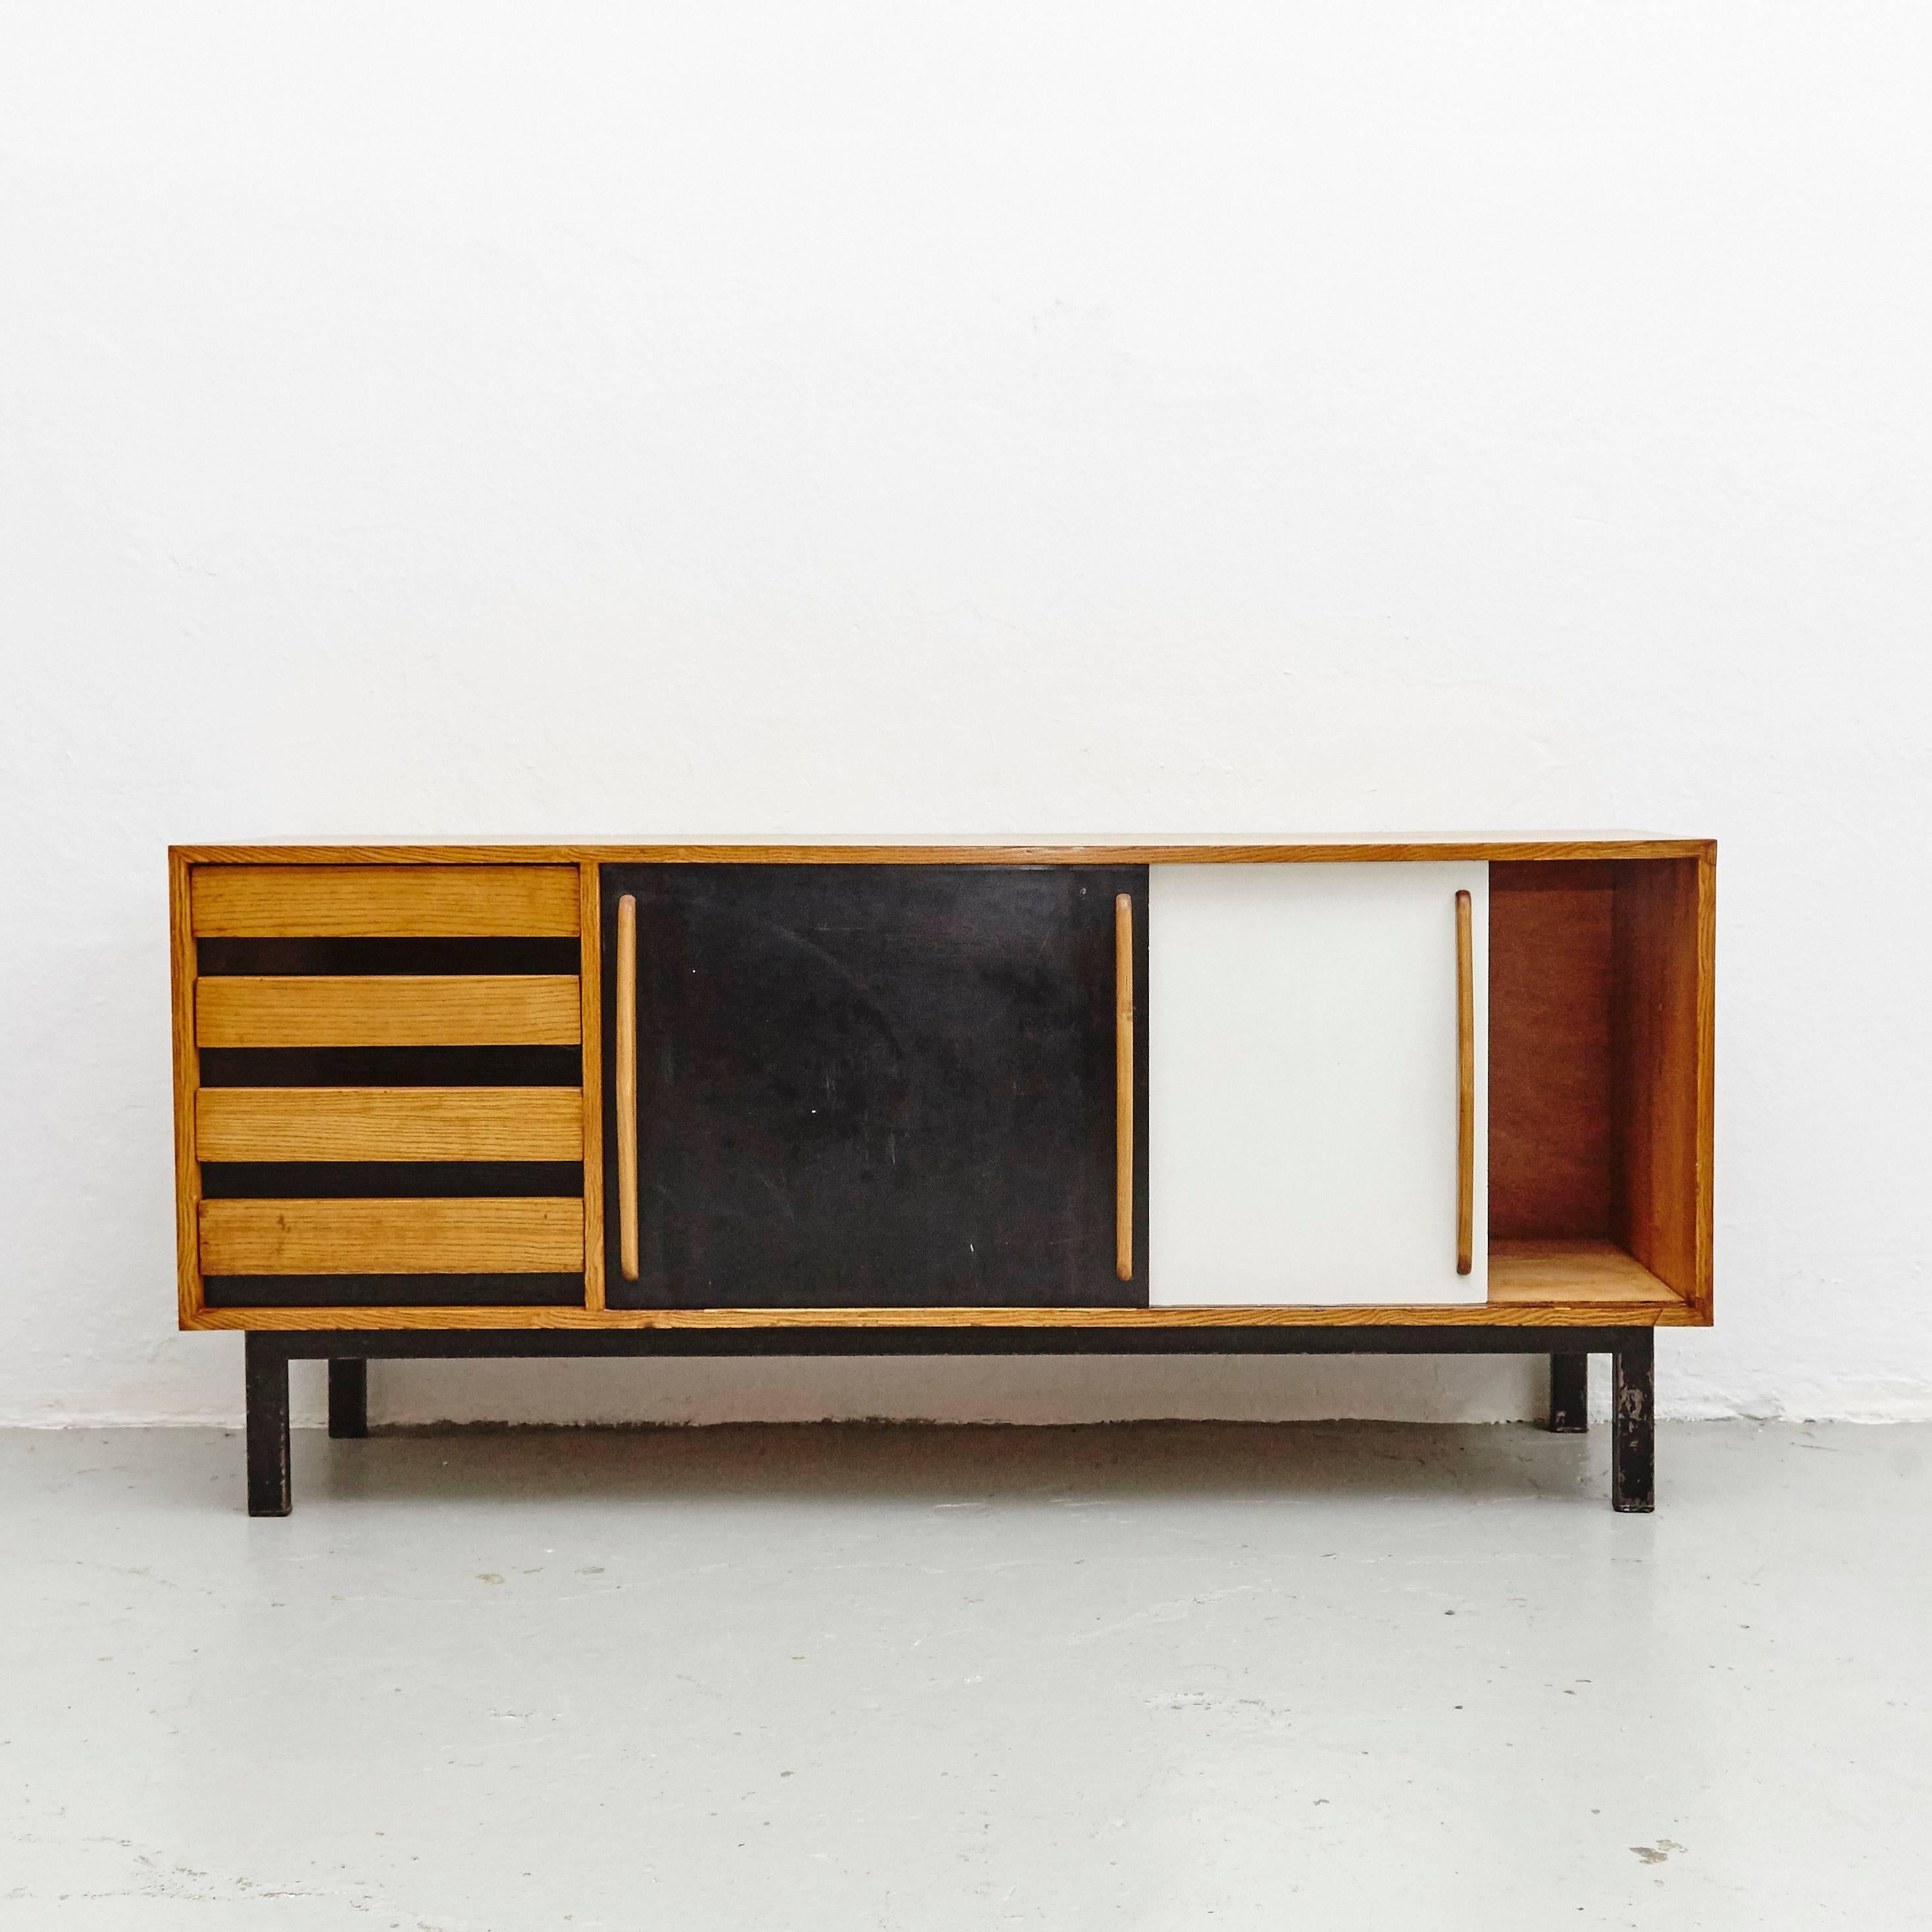 Sideboard designed by Charlotte Perriand, circa 1950.
Edited by Steph Simon, France.
Steel base, wood structure and grips, lacquered sliding doors.

Provenance: Cansado, Mauritania (Africa).

In good original condition, with minor wear